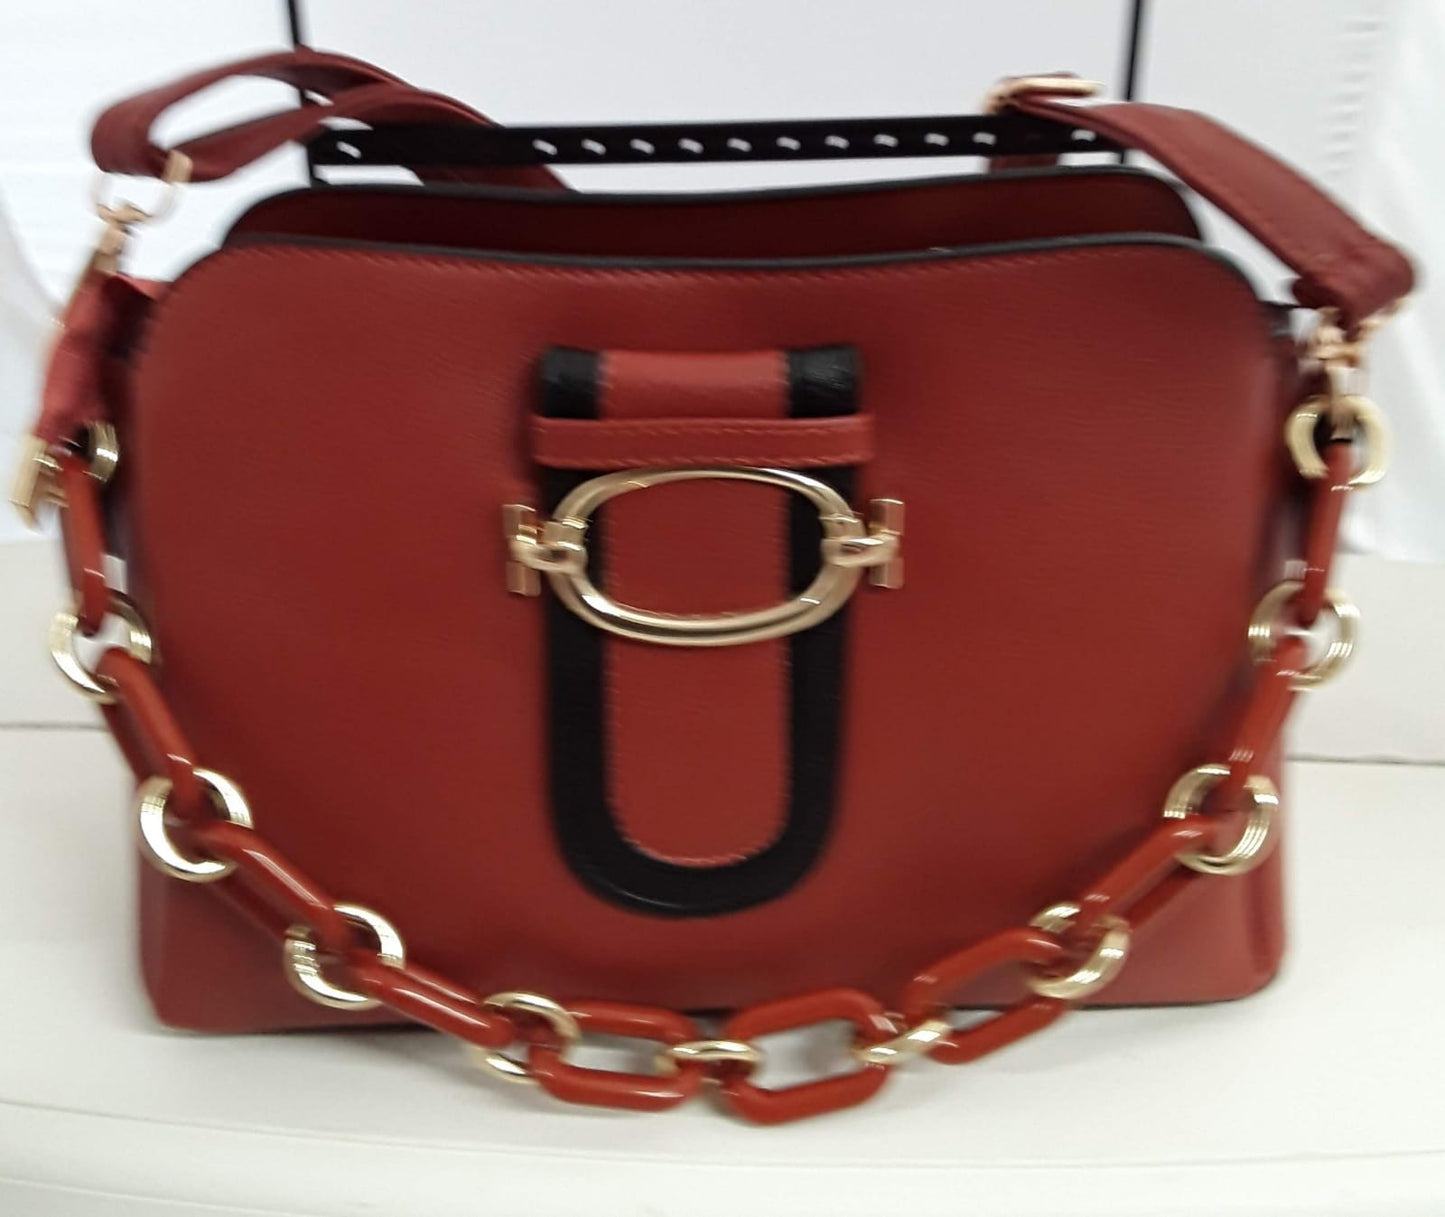 Lovely Firebrick Hand Bag with Chain Link Strap